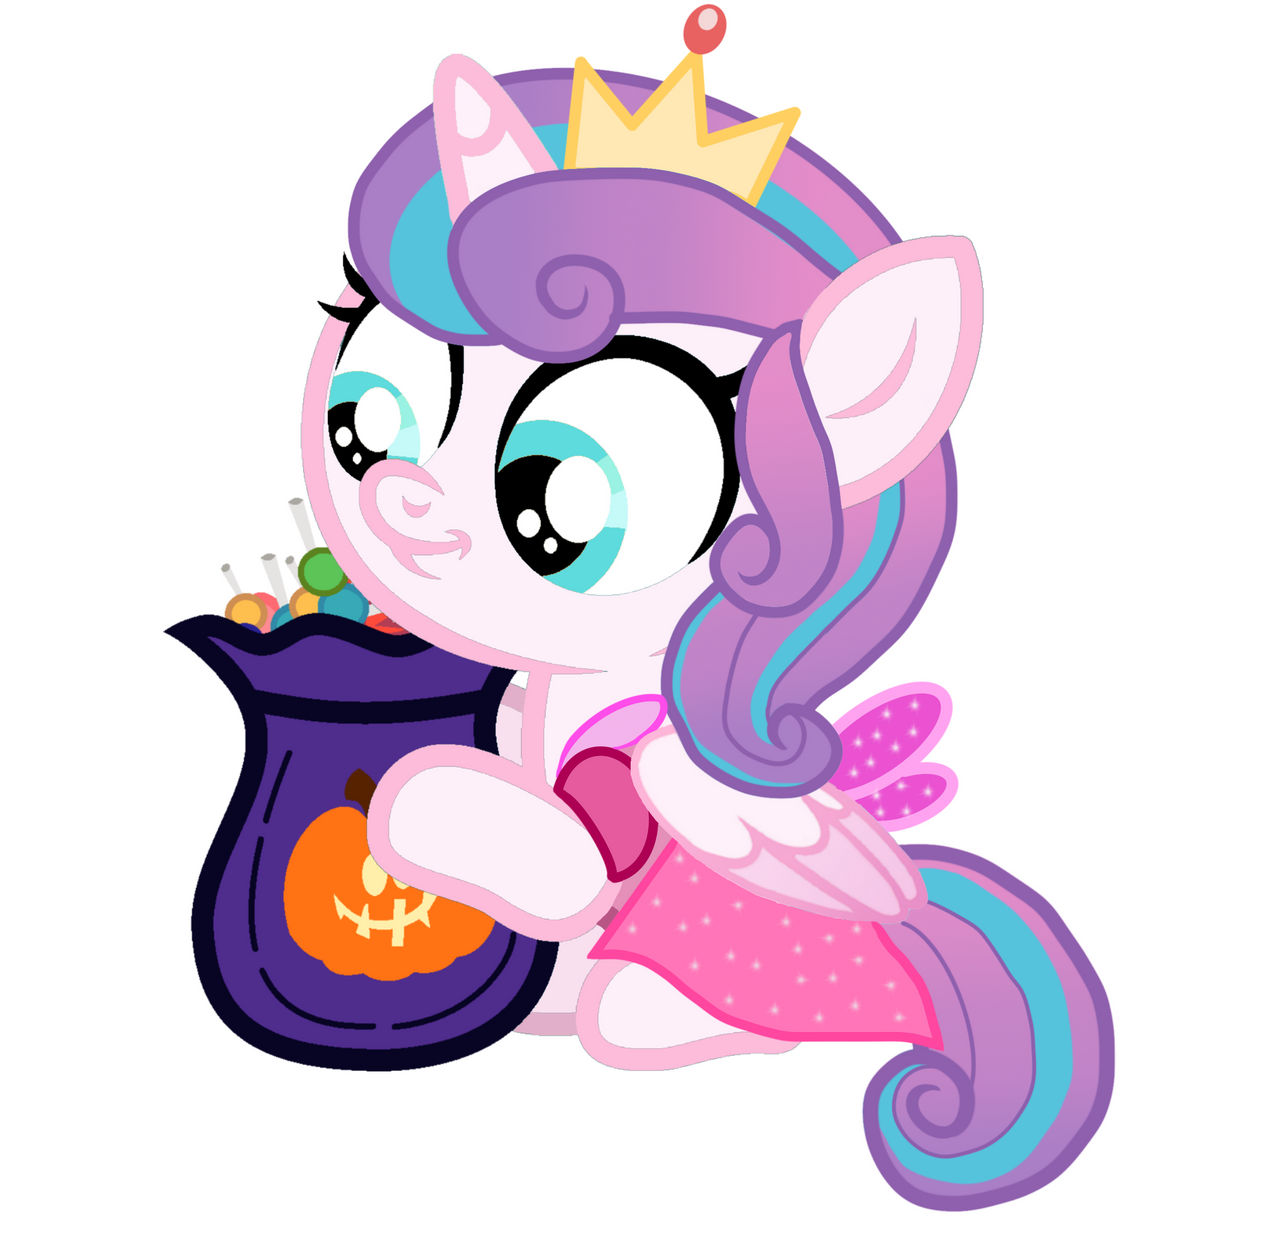 flurry_heart_in_costume_with_candies_by_princessedith568_dfeuz01-fullview.jpg